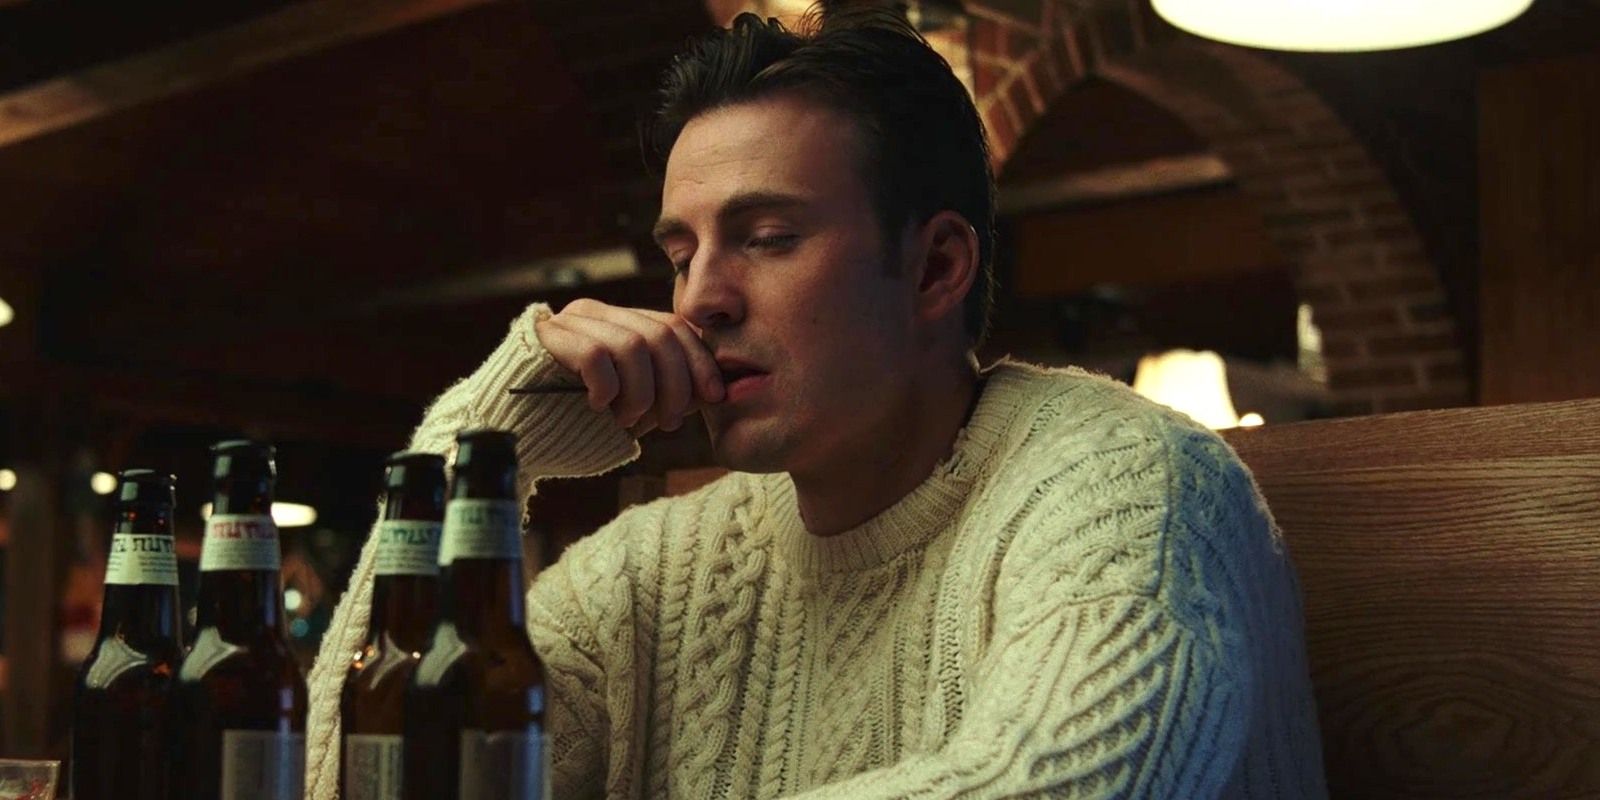 Chris Evans Wearing the famous sweater in Knives Out